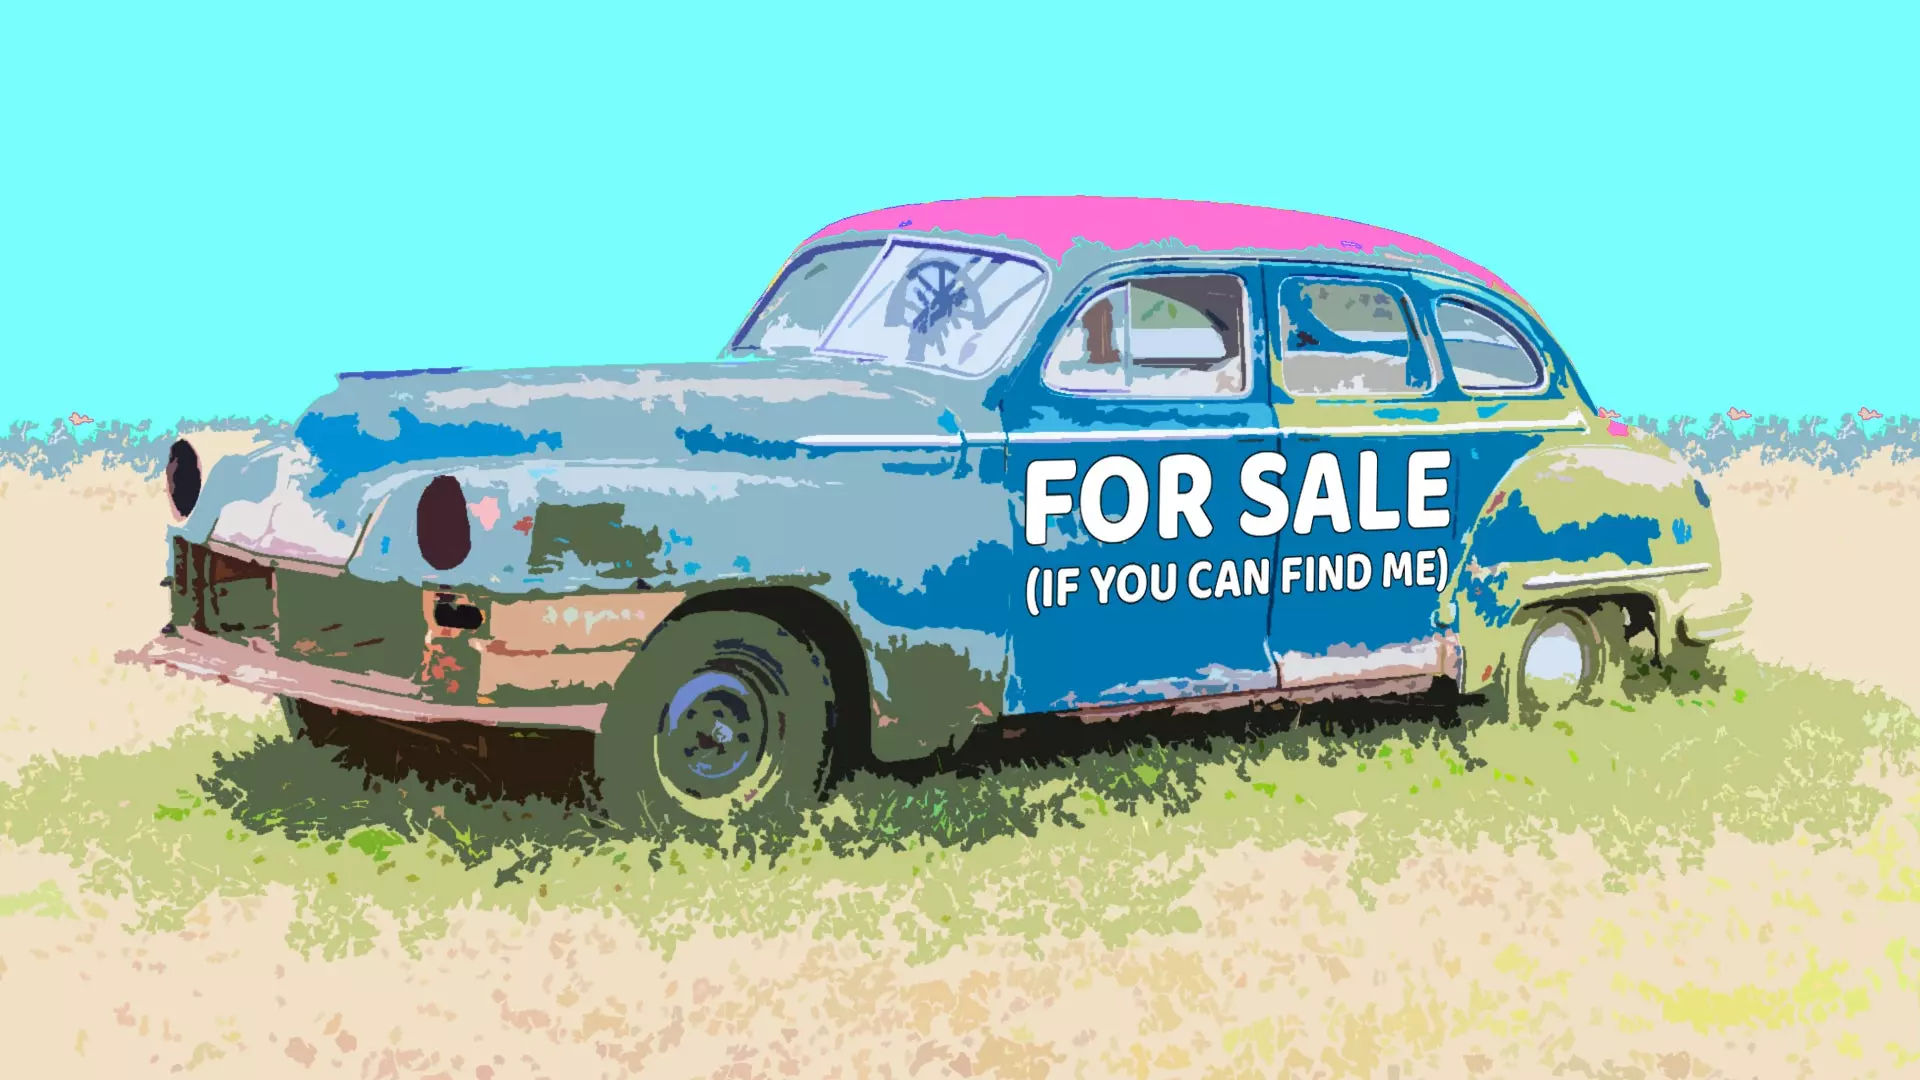 How Do You Offer To Buy a Car When Its Owner Is Hard To Track Down? | Autance